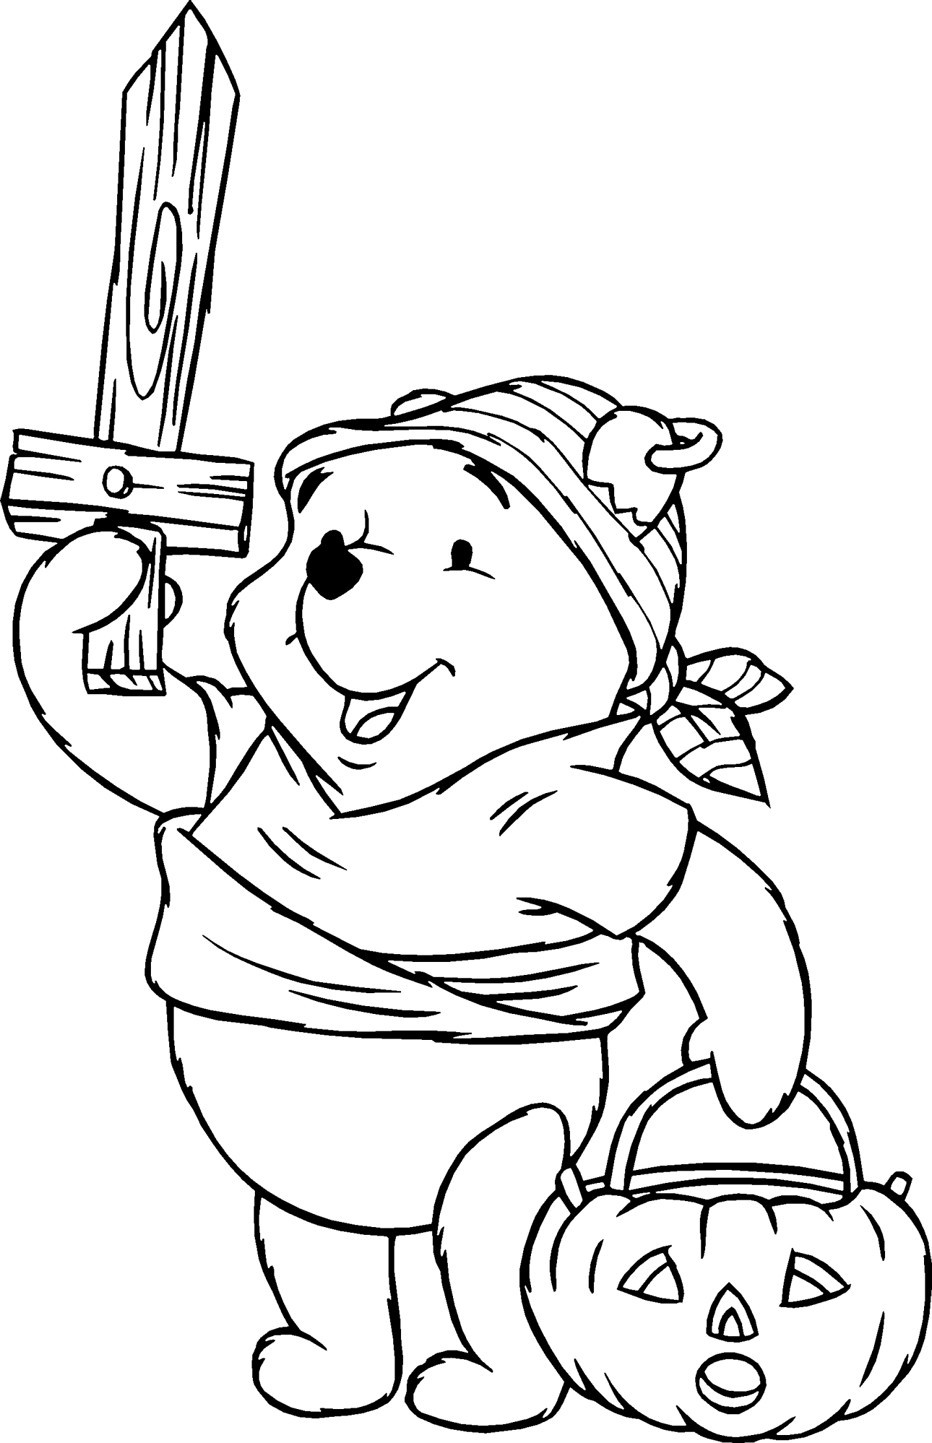 The Best Free Coloring Pages for toddlers - Home, Family, Style and Art